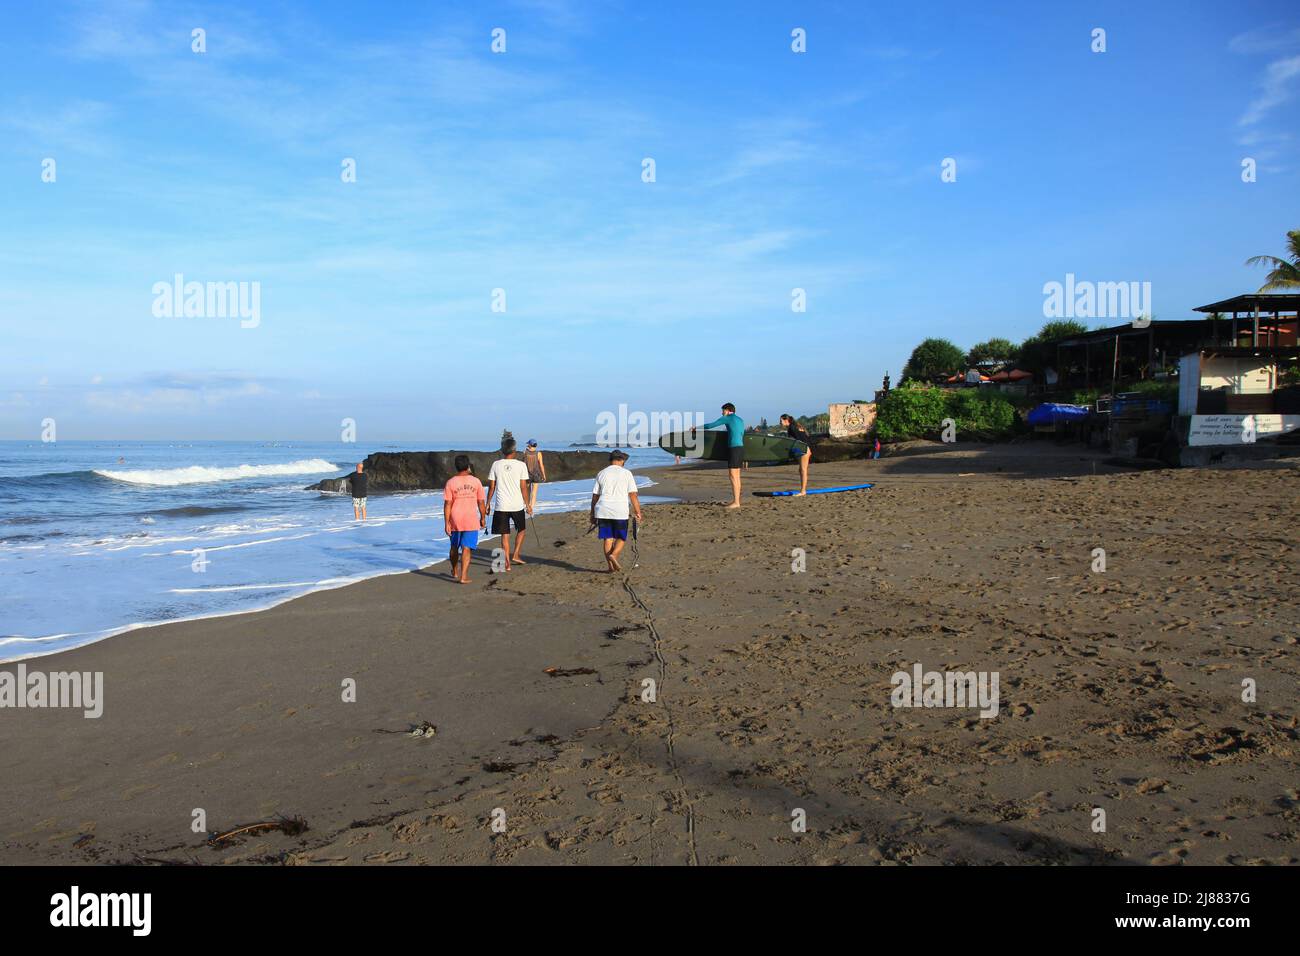 A surf instructor with a woman at Batu Bolong Beach in Canggu, Bali, Indonesia. Another person is walking along the beach with two dogs nearby. Stock Photo